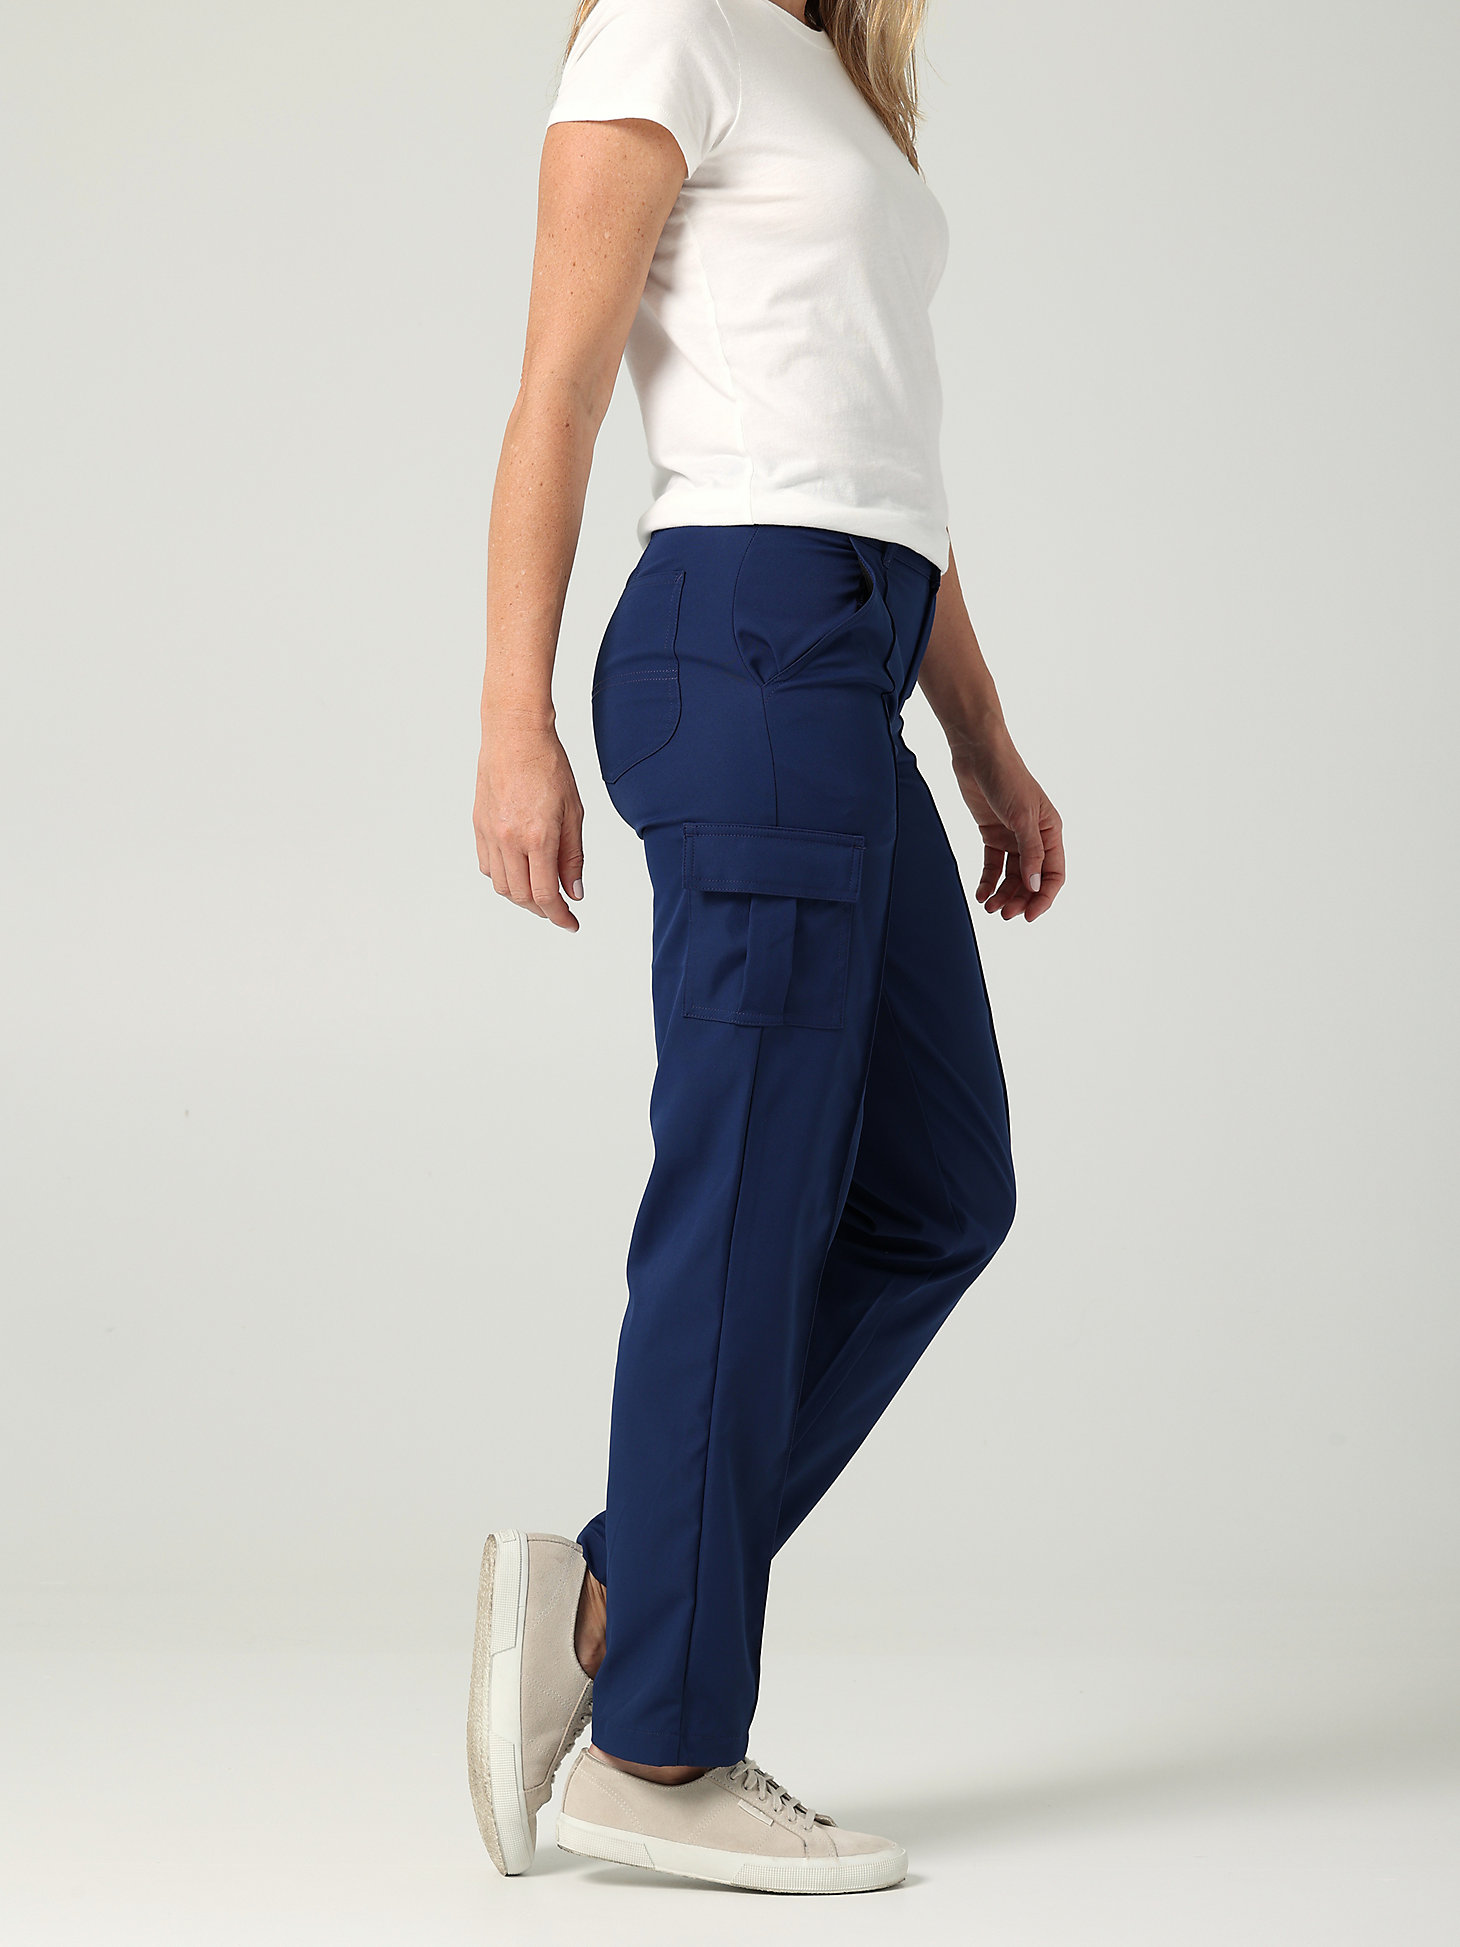 Women's Ultra Lux with Flex-to-Go Seamed Cargo Straight Leg Pant in Thunder alternative view 2